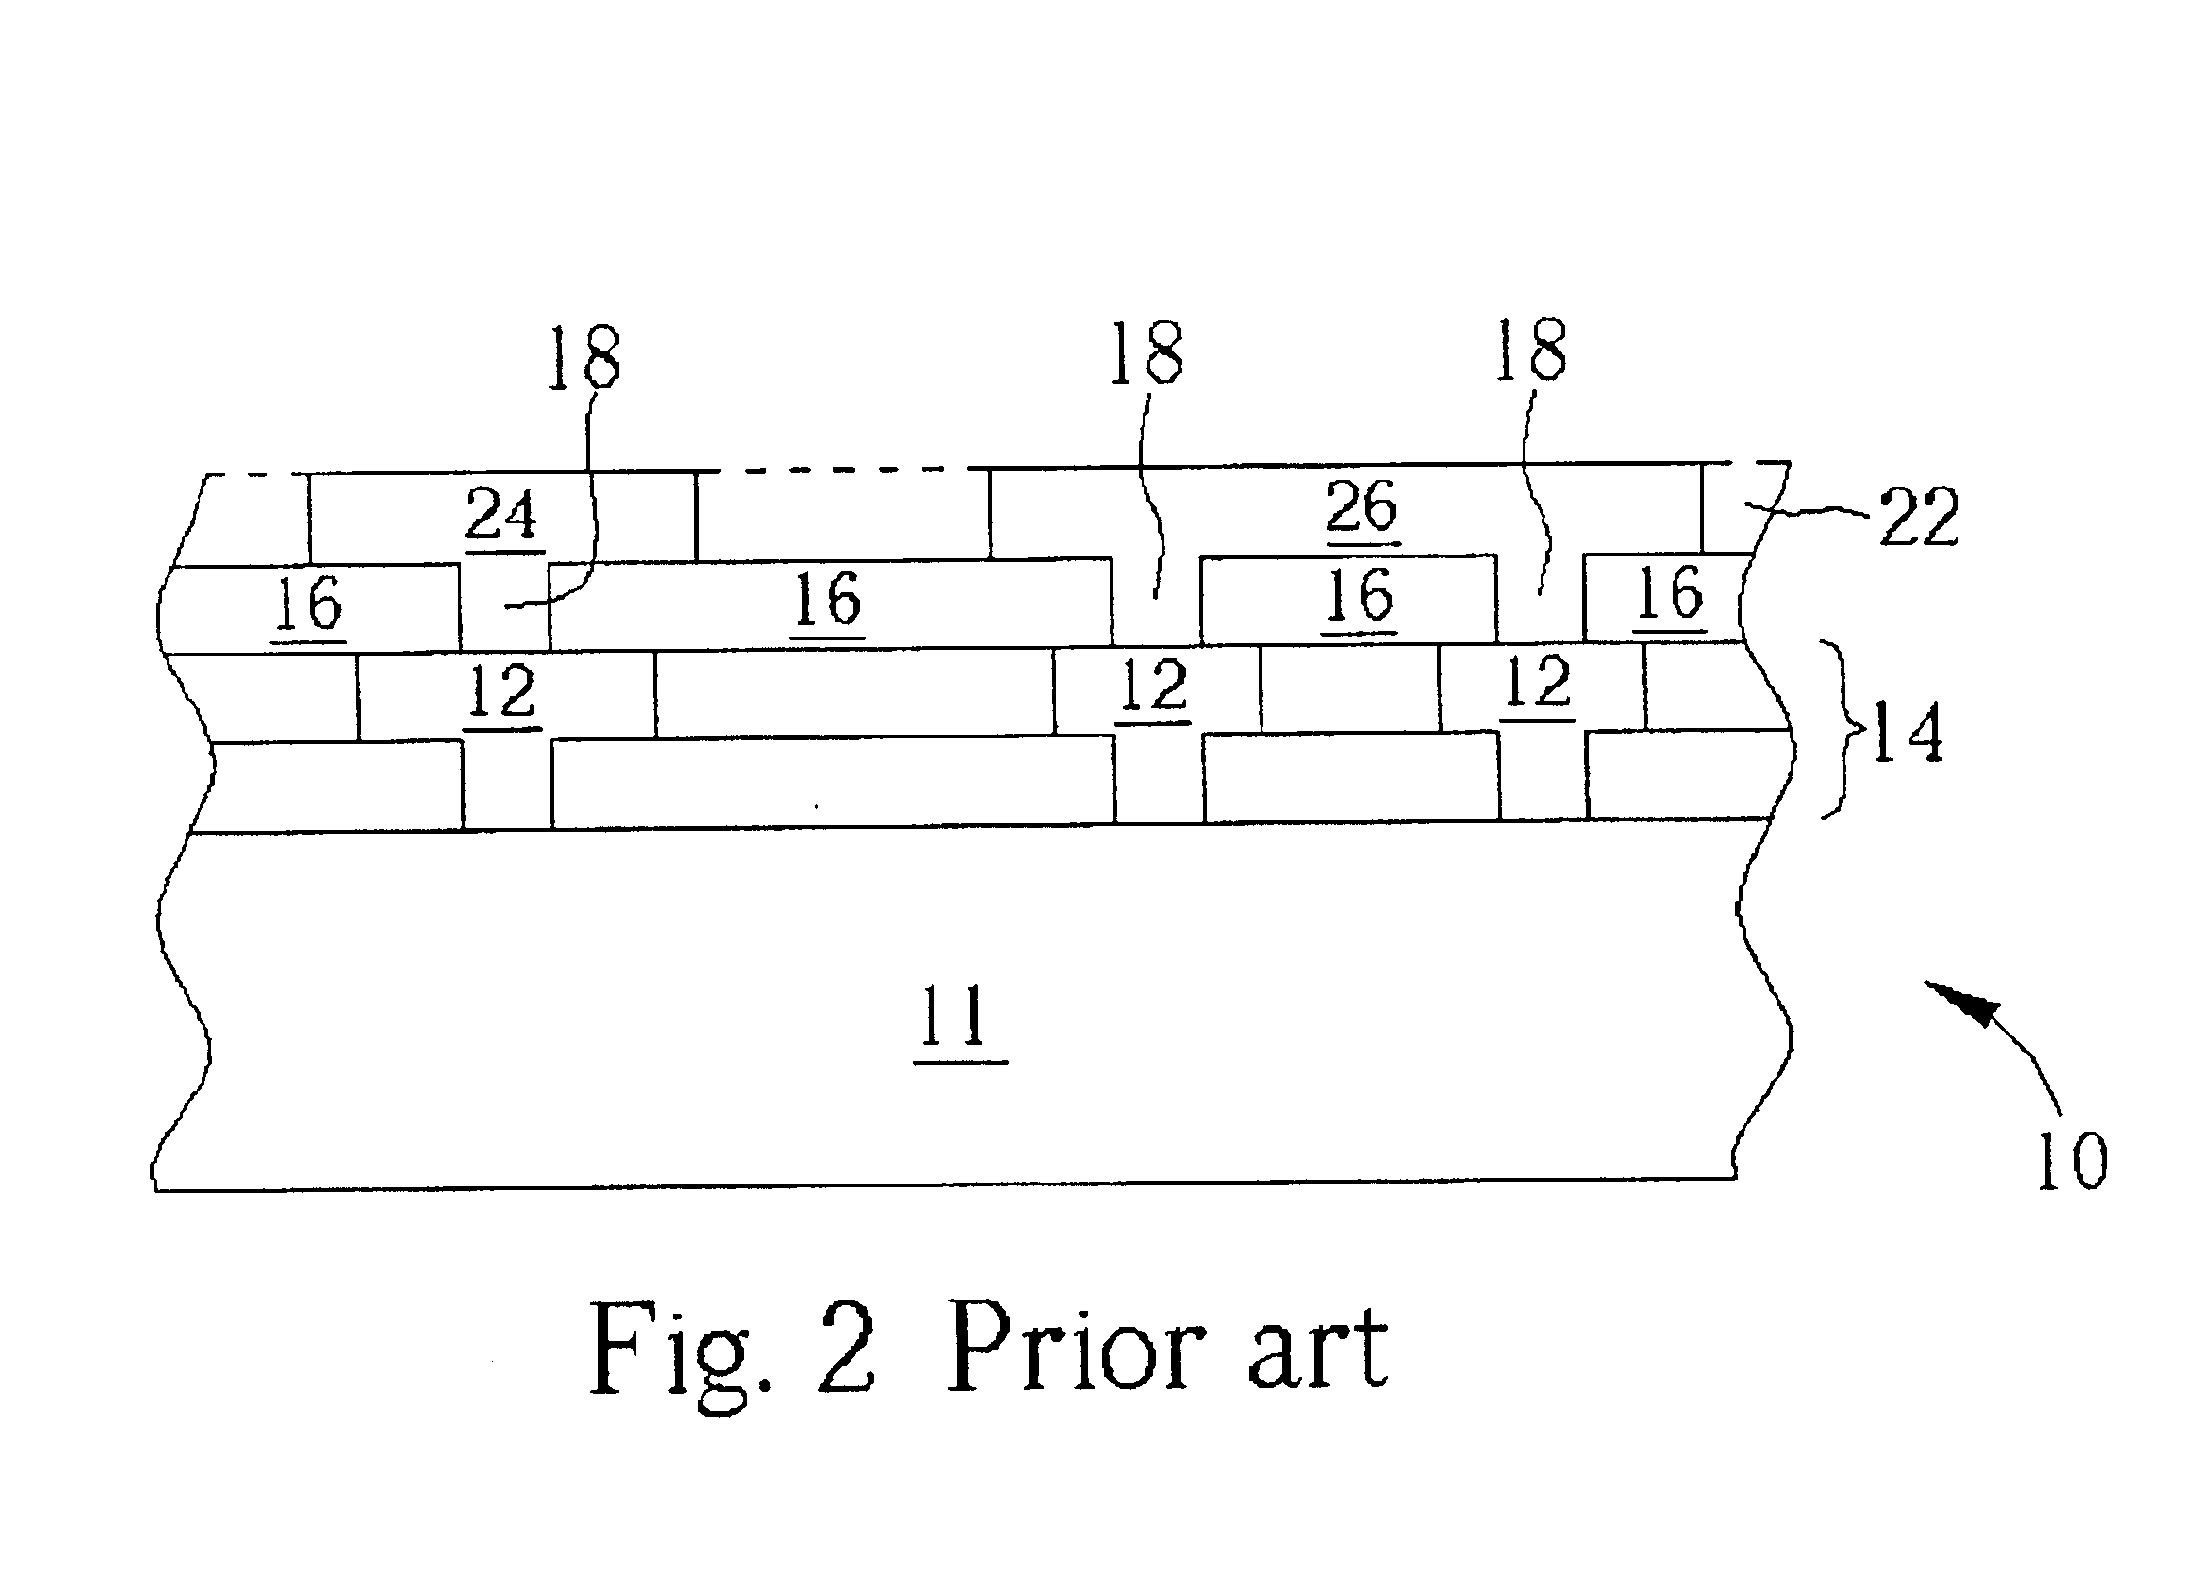 Method of forming a fuse